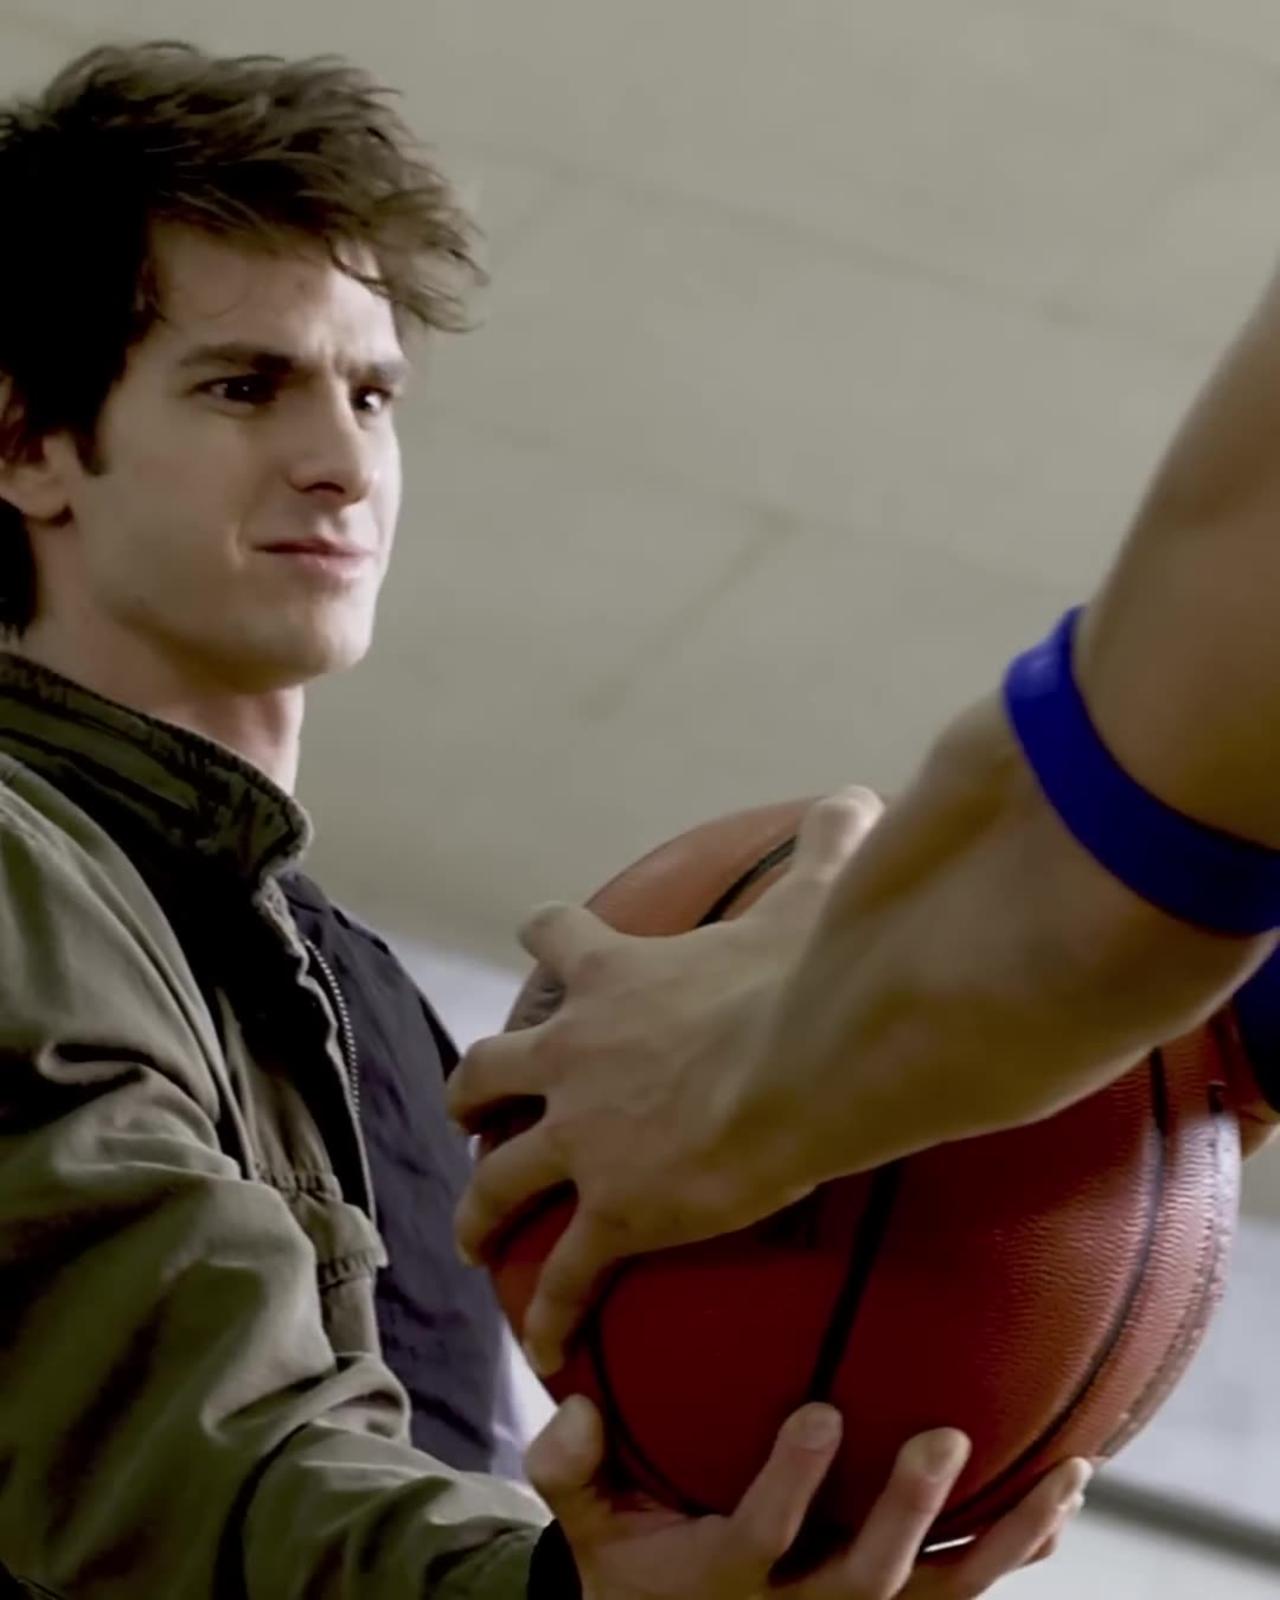 You should not mess with Andrew Garfield